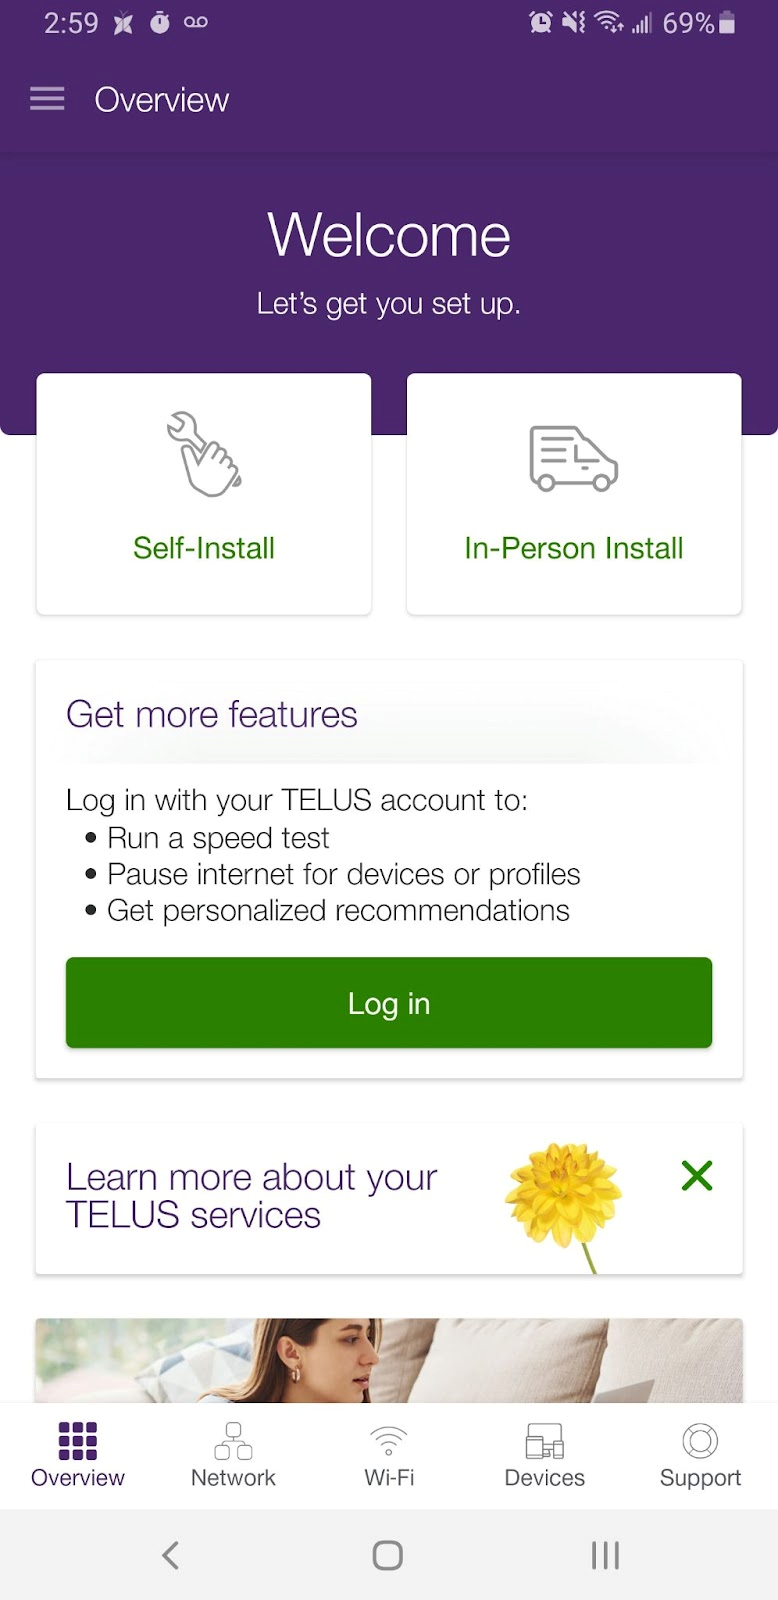 An image of the TELUS Connect app's Welcome screen is shown